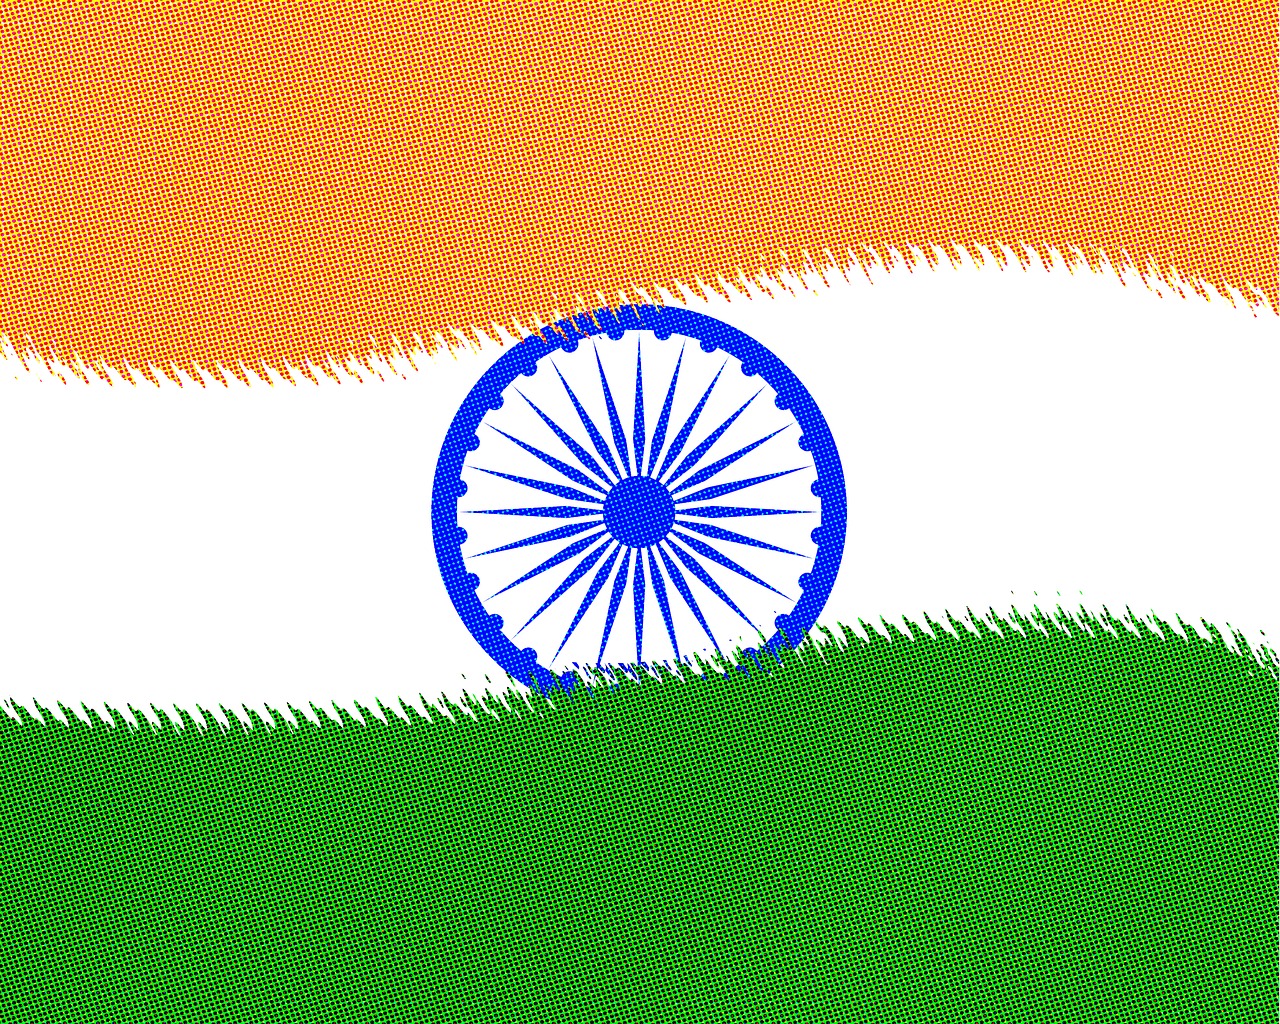 tricolour-of-indian-flag